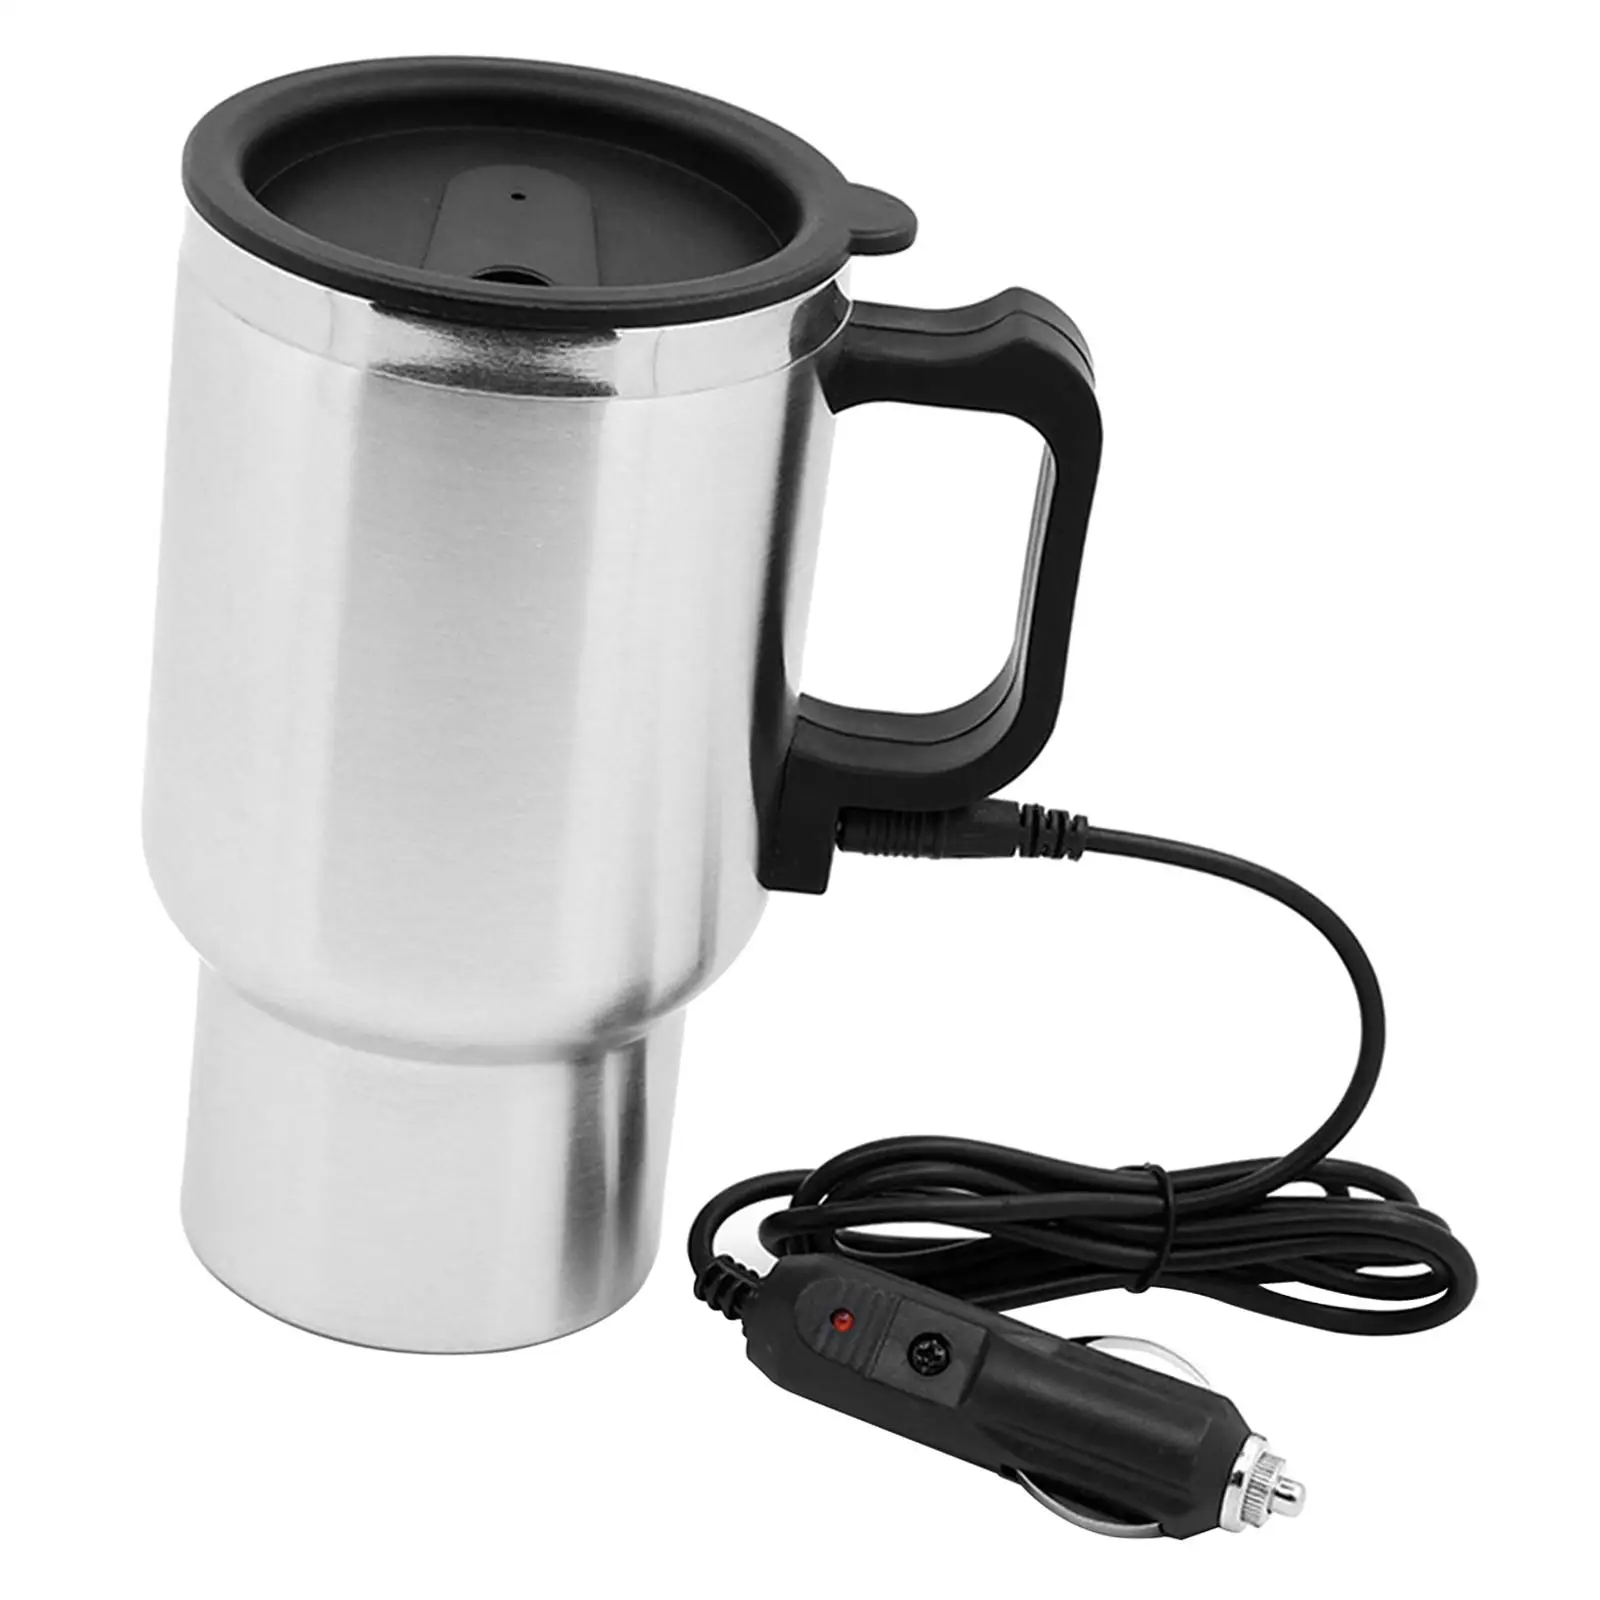 12V Car Heating Cup 500ml Stainless Steel Heated Mug Cup Car Kettle for Tea Heating Water Milk